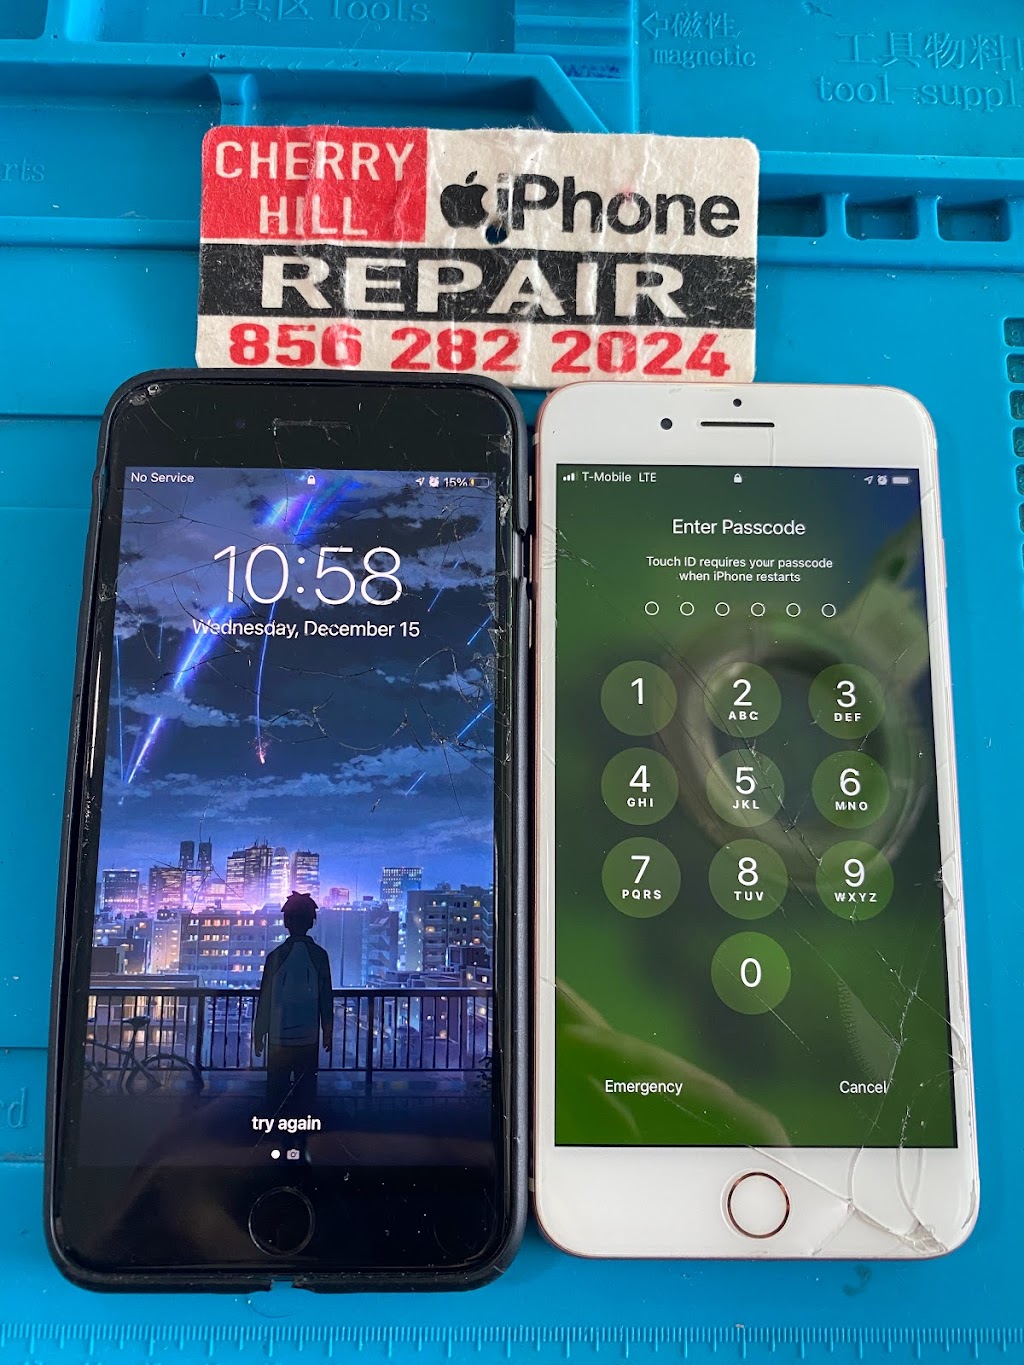 Cherry Hill iPhone Repair | 1818 Old Cuthbert Rd Suite 211, Cherry Hill, NJ 08034 | Phone: (856) 282-2024